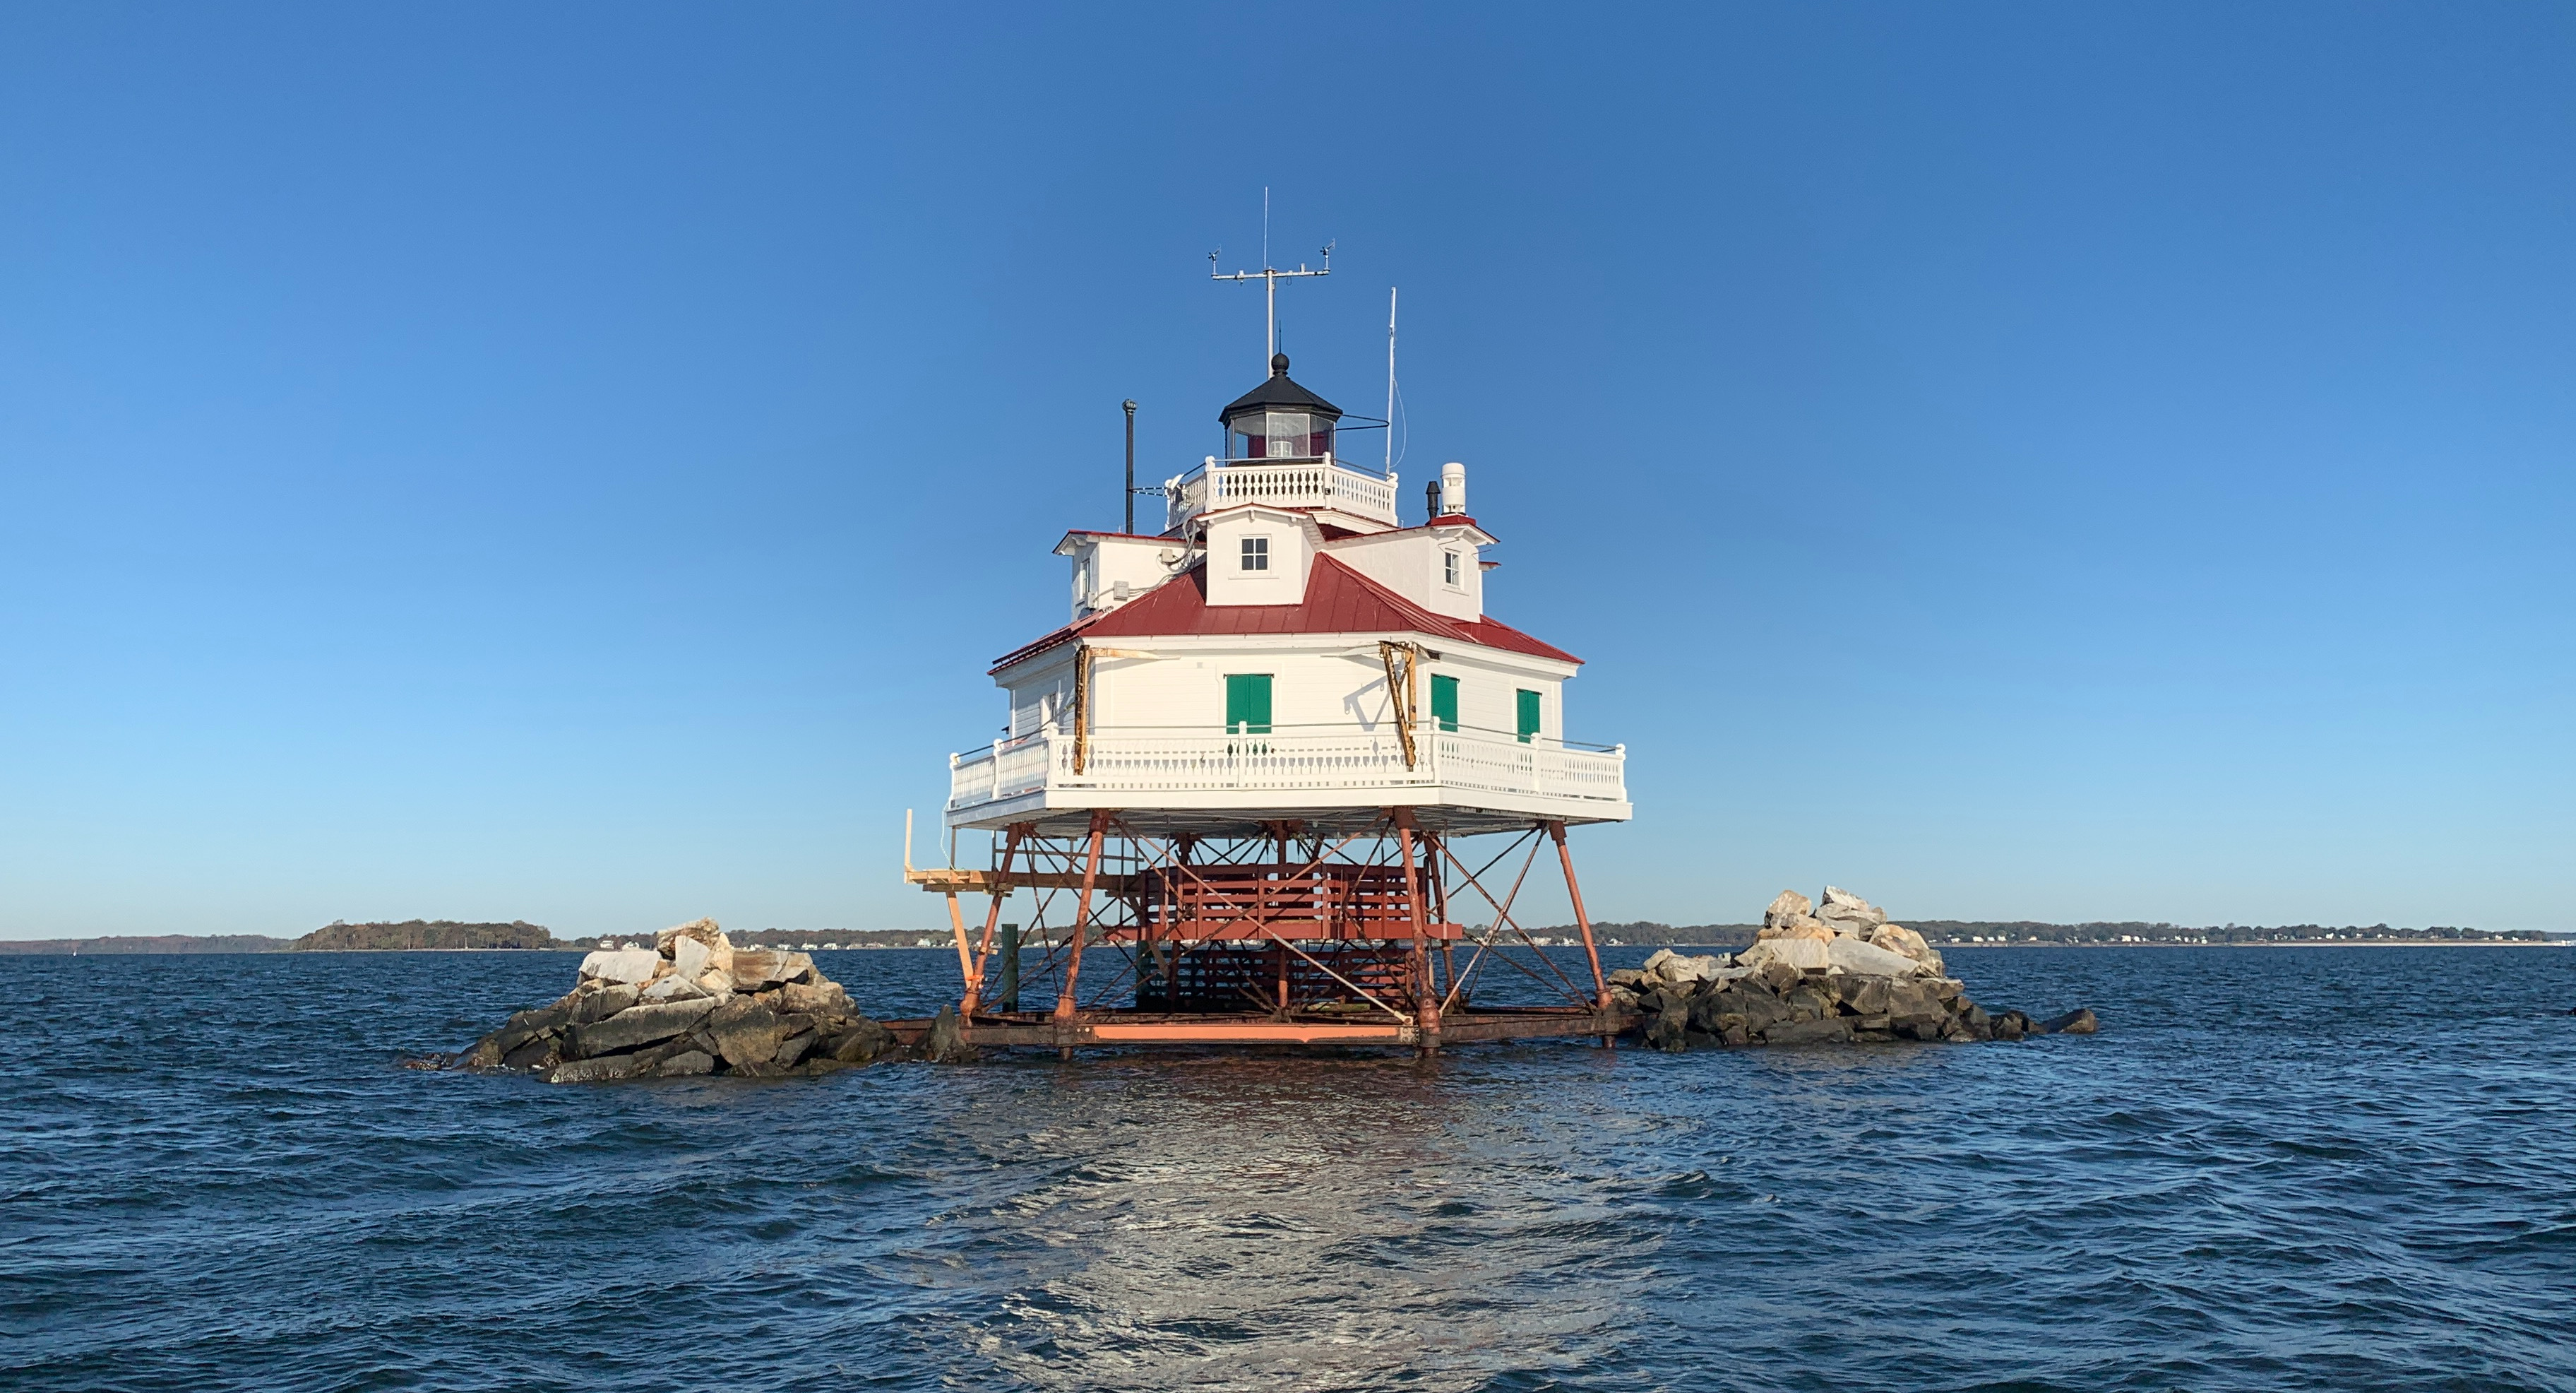 Thomas Point Shoal Lighthouse, Anne Arundel County, Maryland, as featured in the new MPT documentary, Chesapeake Beacons. The film, part of Chesapeake Bay Week 2020, is one of many being aired to celebrate the bay’s history, people, natural resources, and efforts to protect its diverse ecosystem.